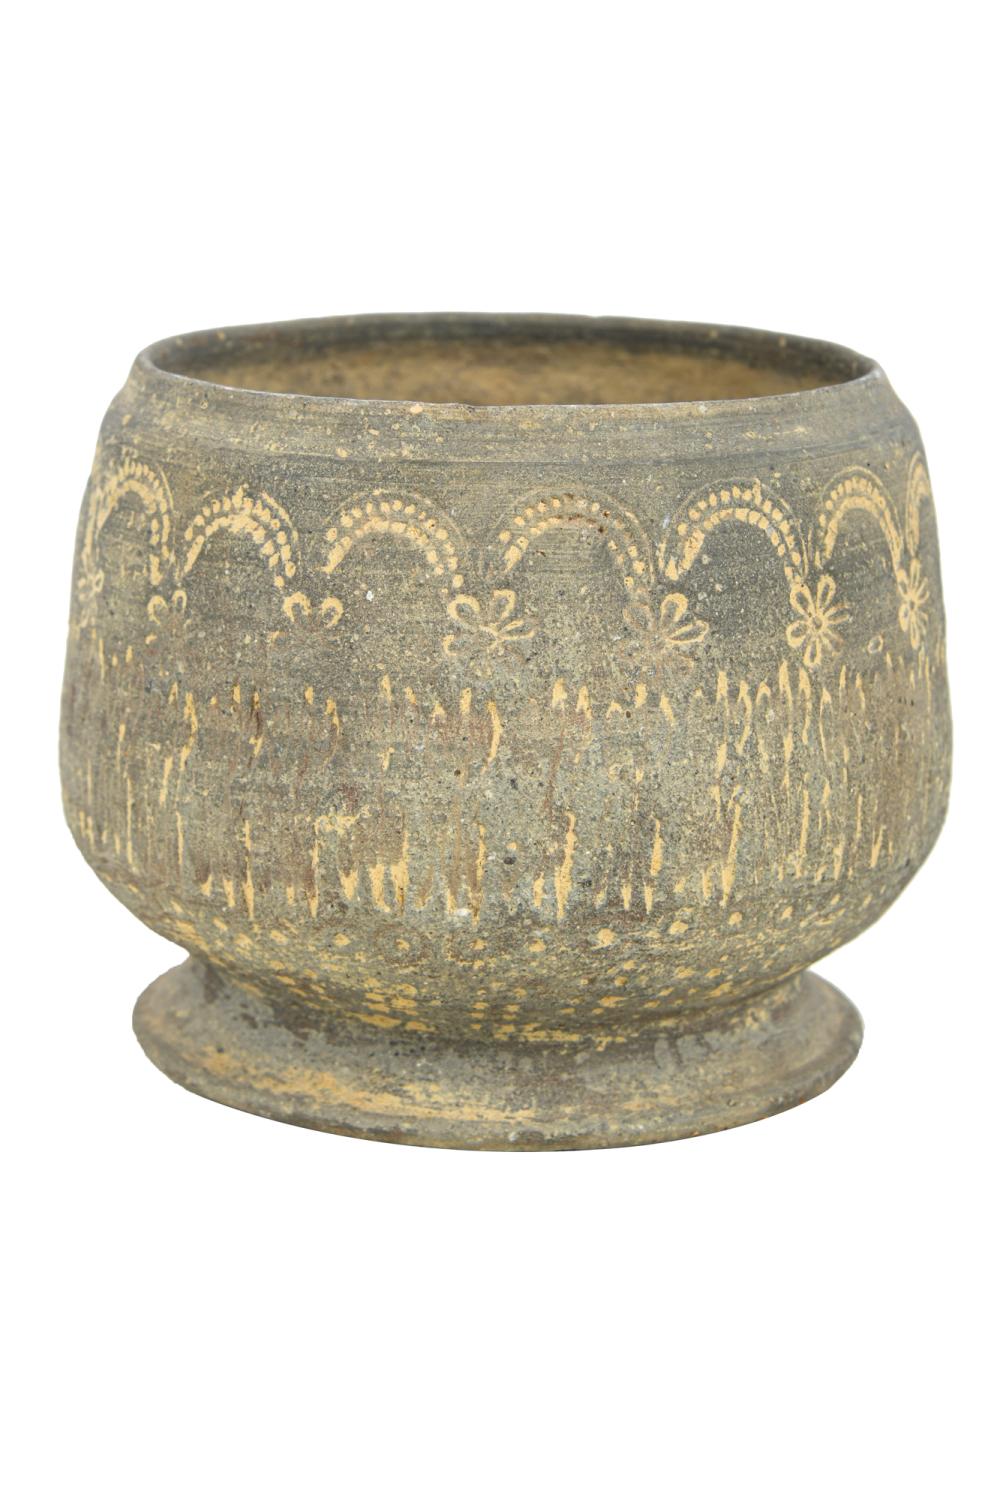 KOREAN FOOTED BOWL4 1/4 inches wide;